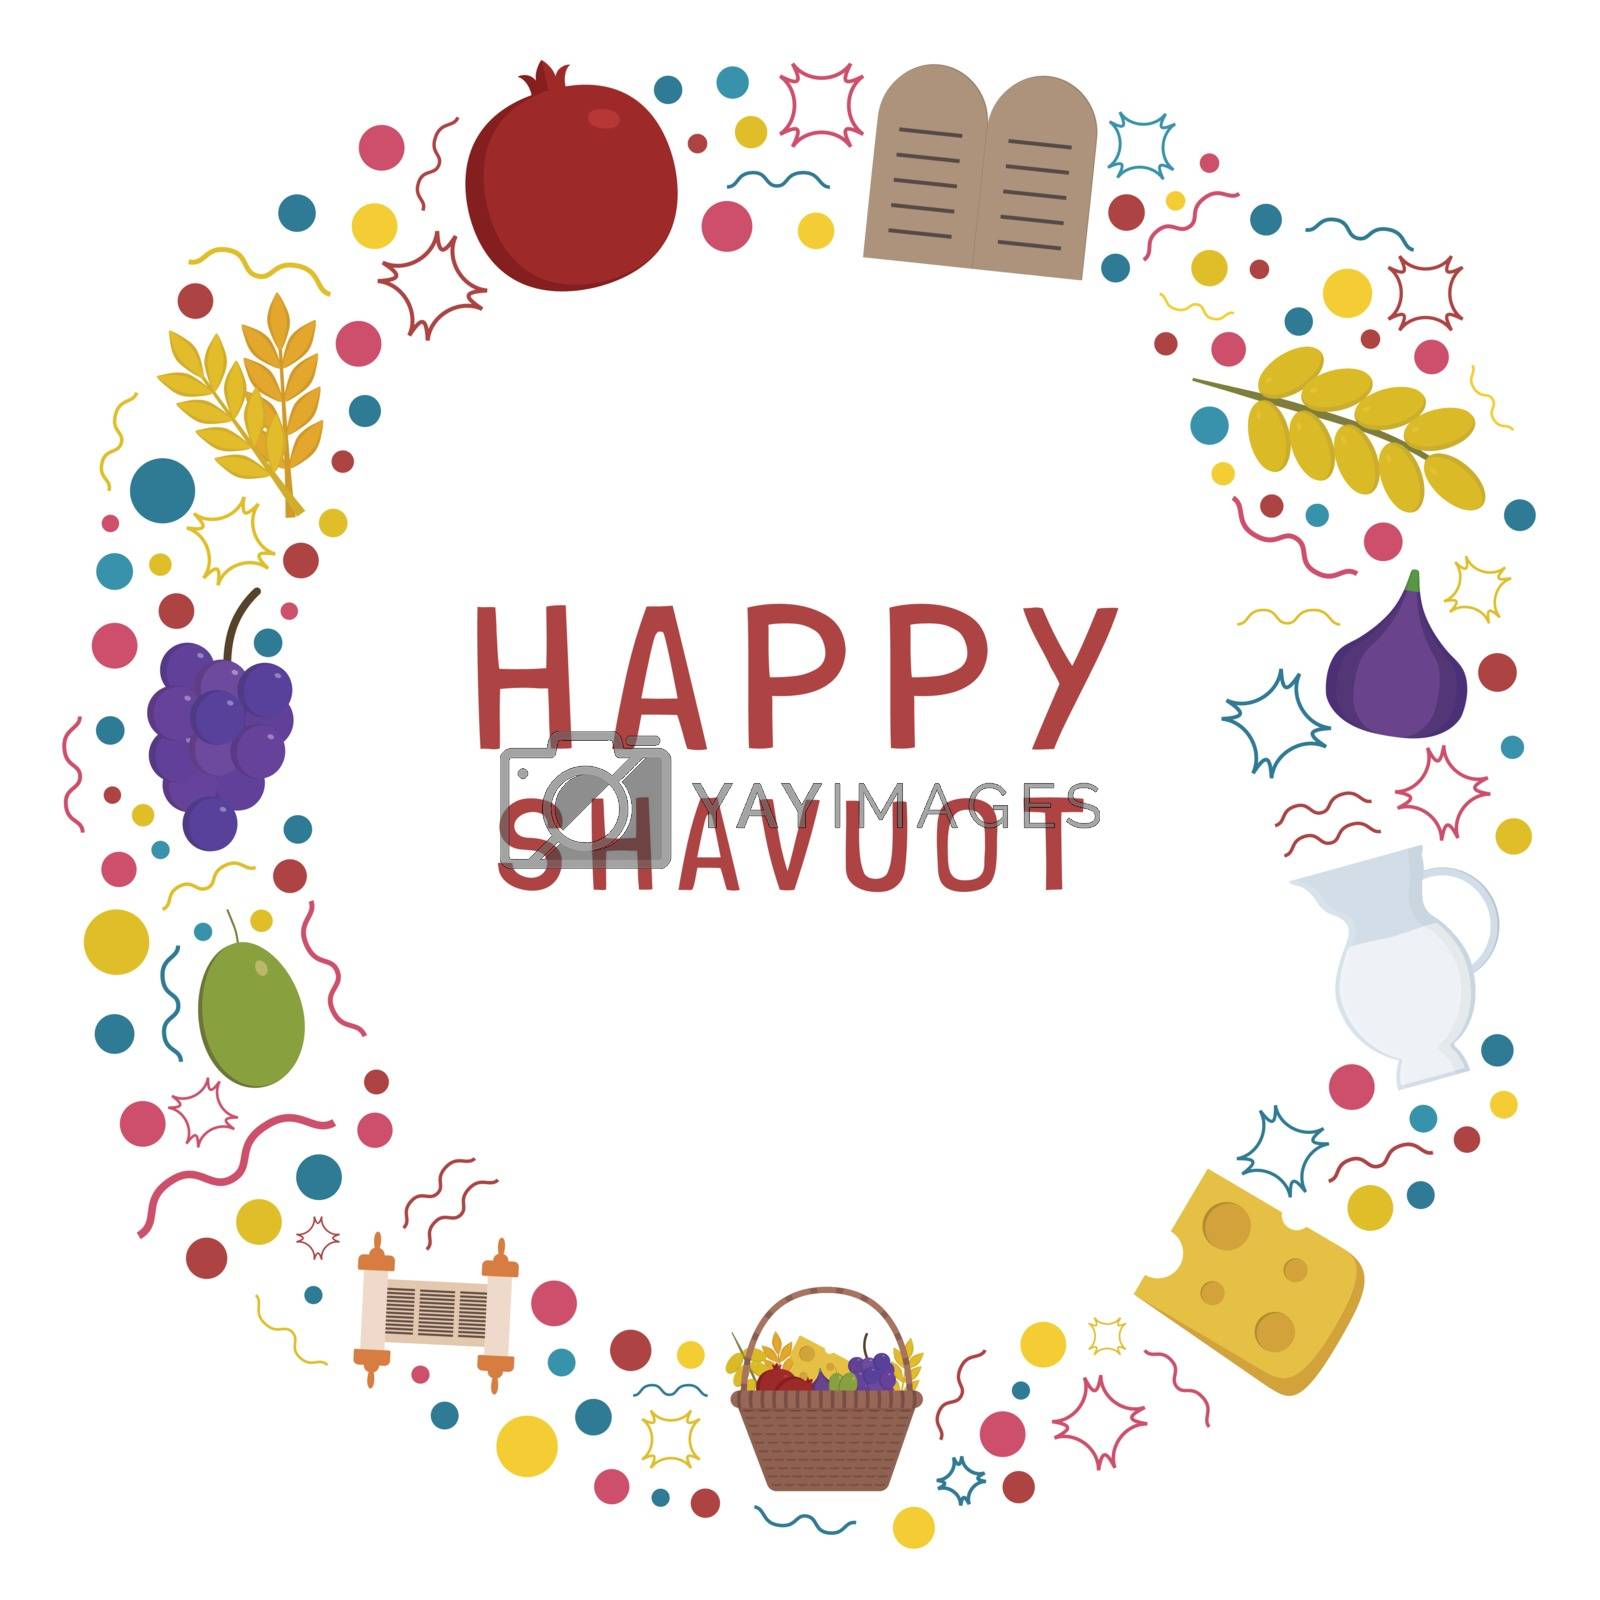 Royalty free image of Frame with Shavuot holiday flat design icons with text in englis by wavemovies